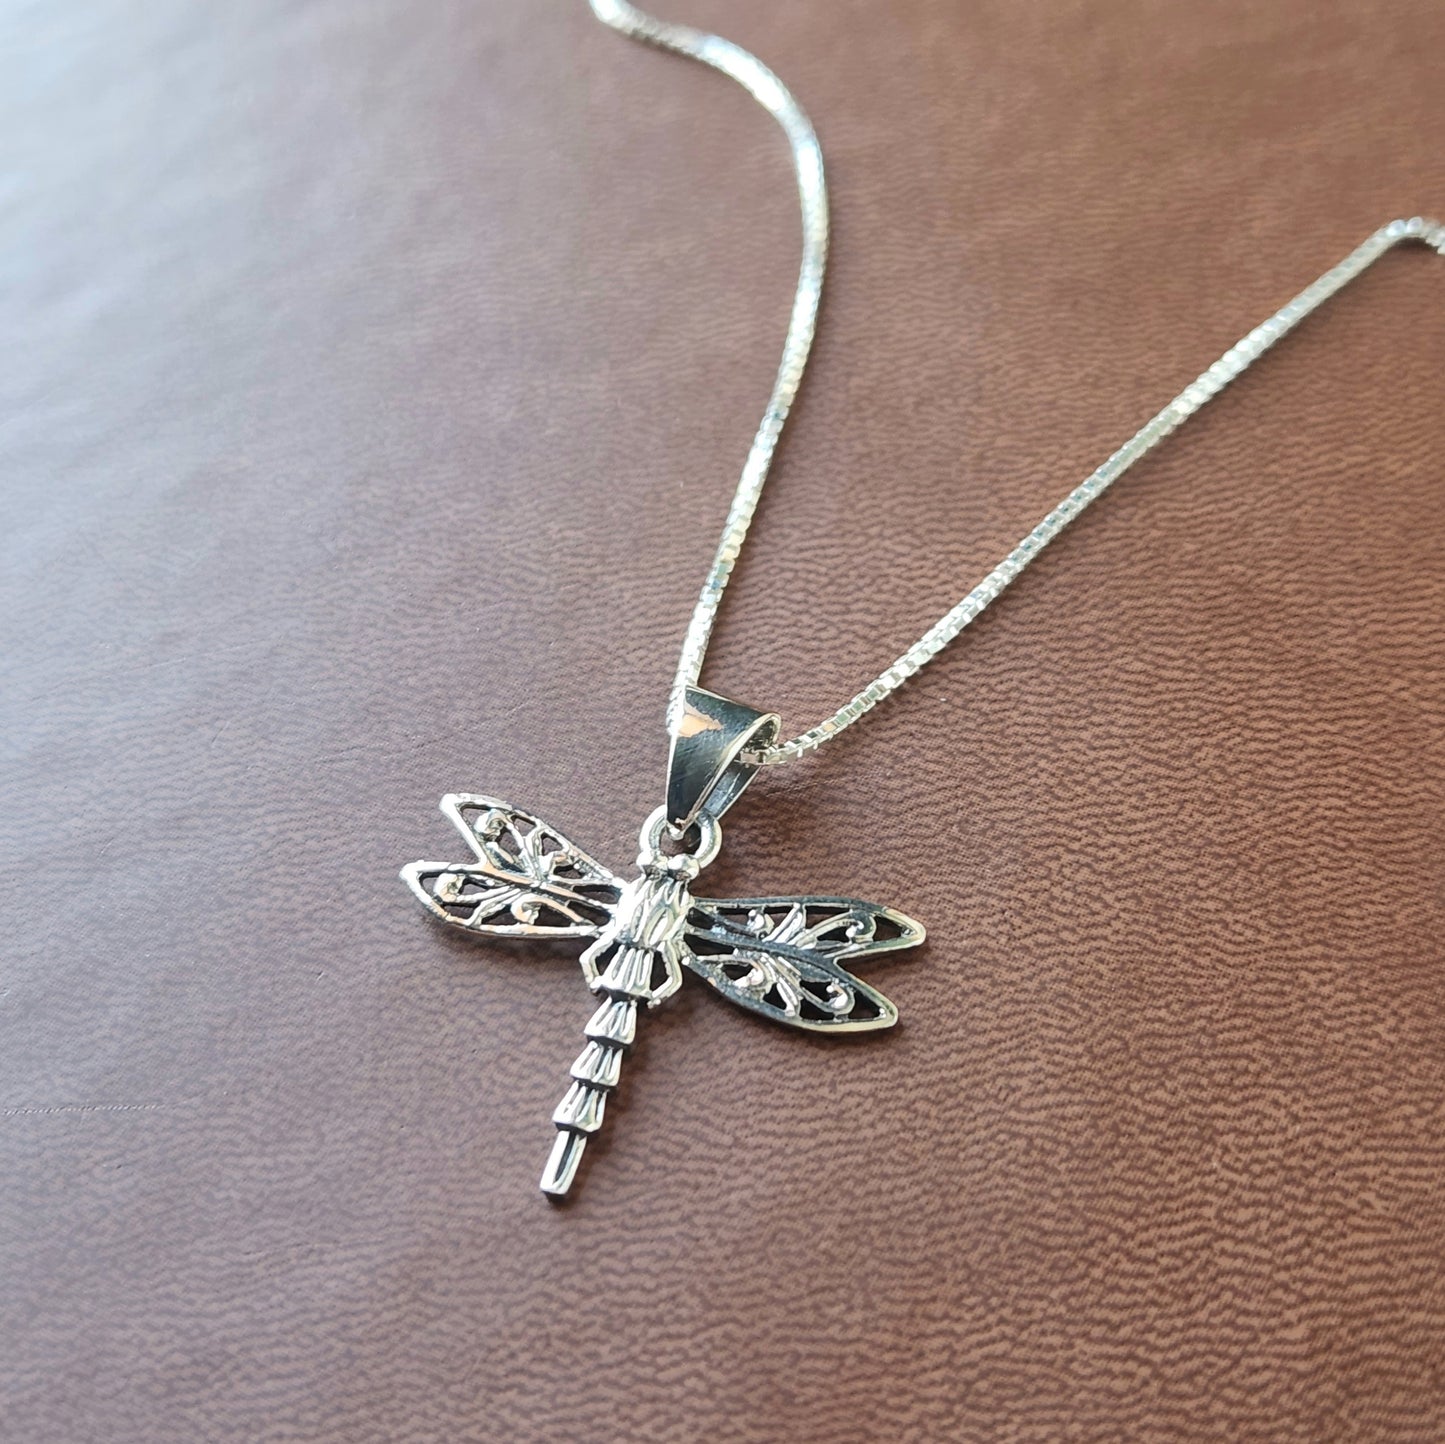 The Dragonfly Pendant